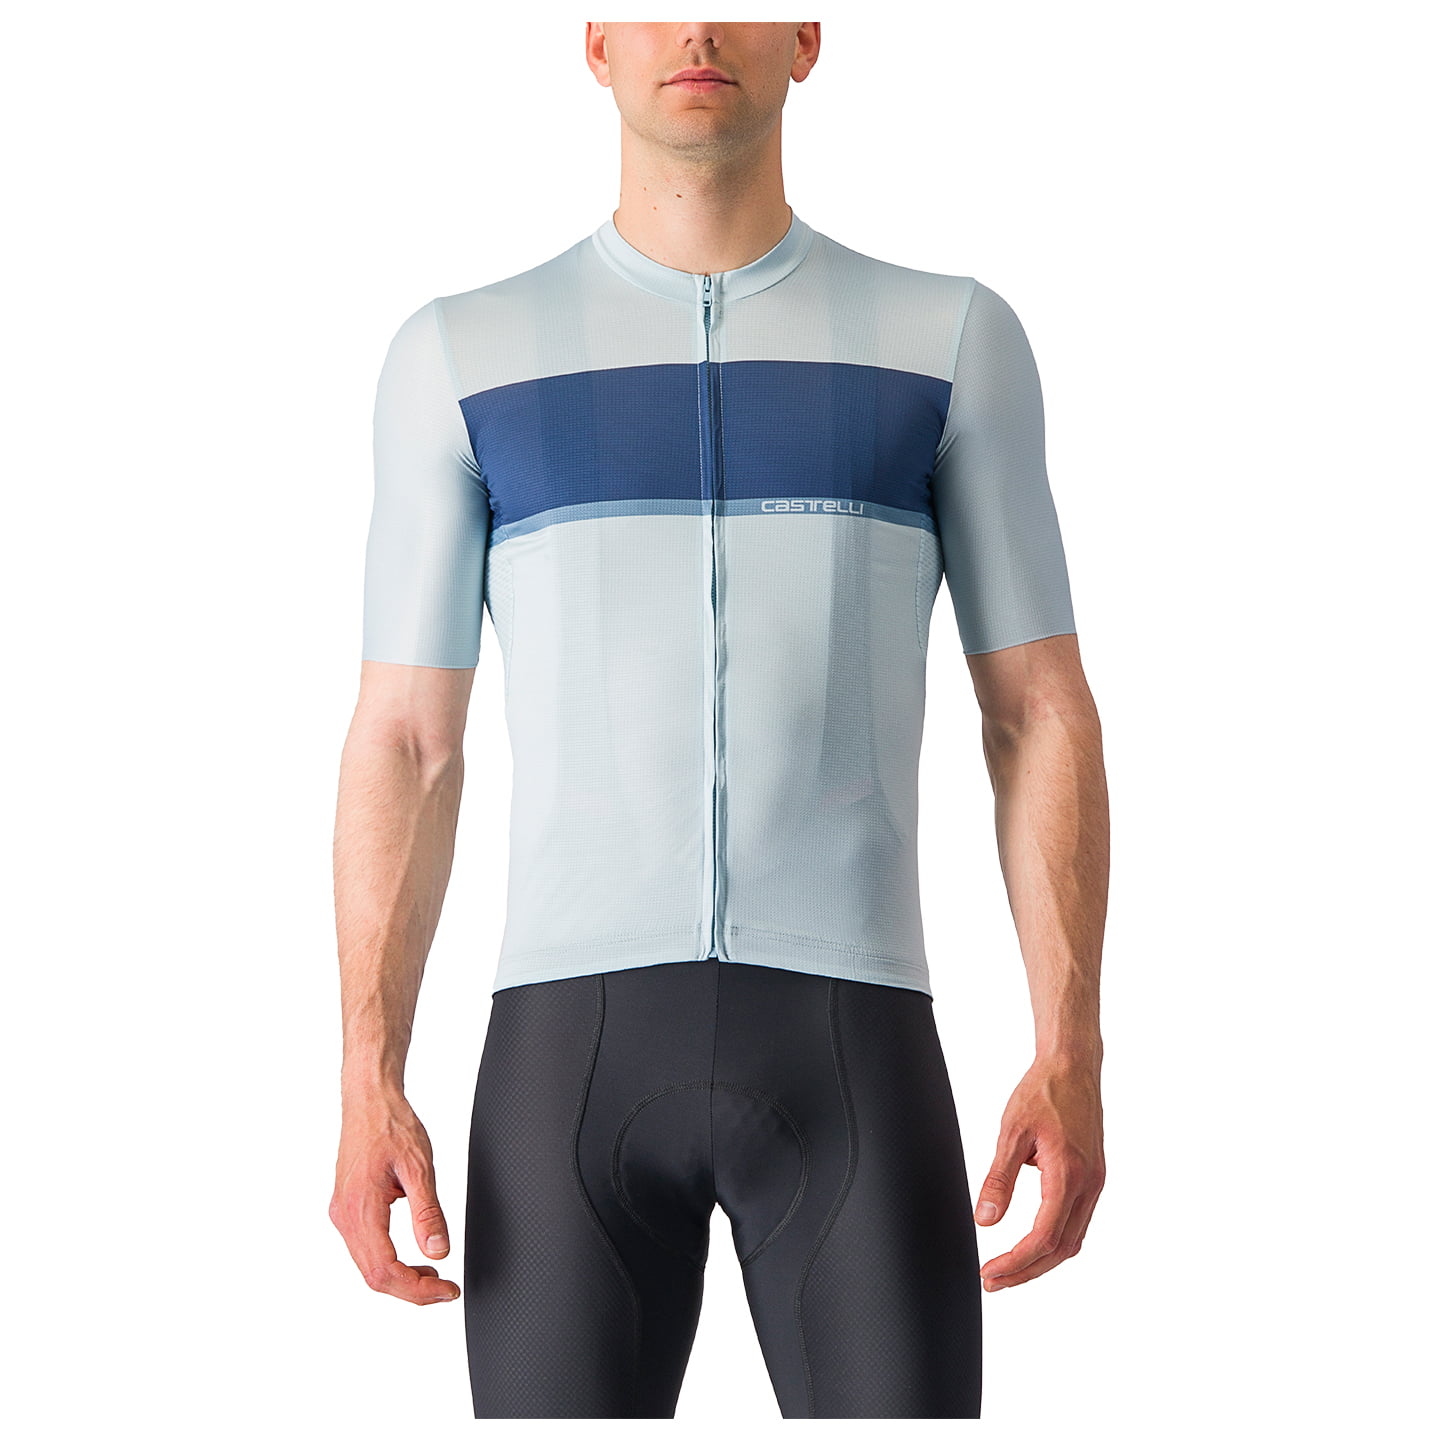 CASTELLI Tradizione Short Sleeve Jersey, for men, size 2XL, Cycling jersey, Cycle clothing